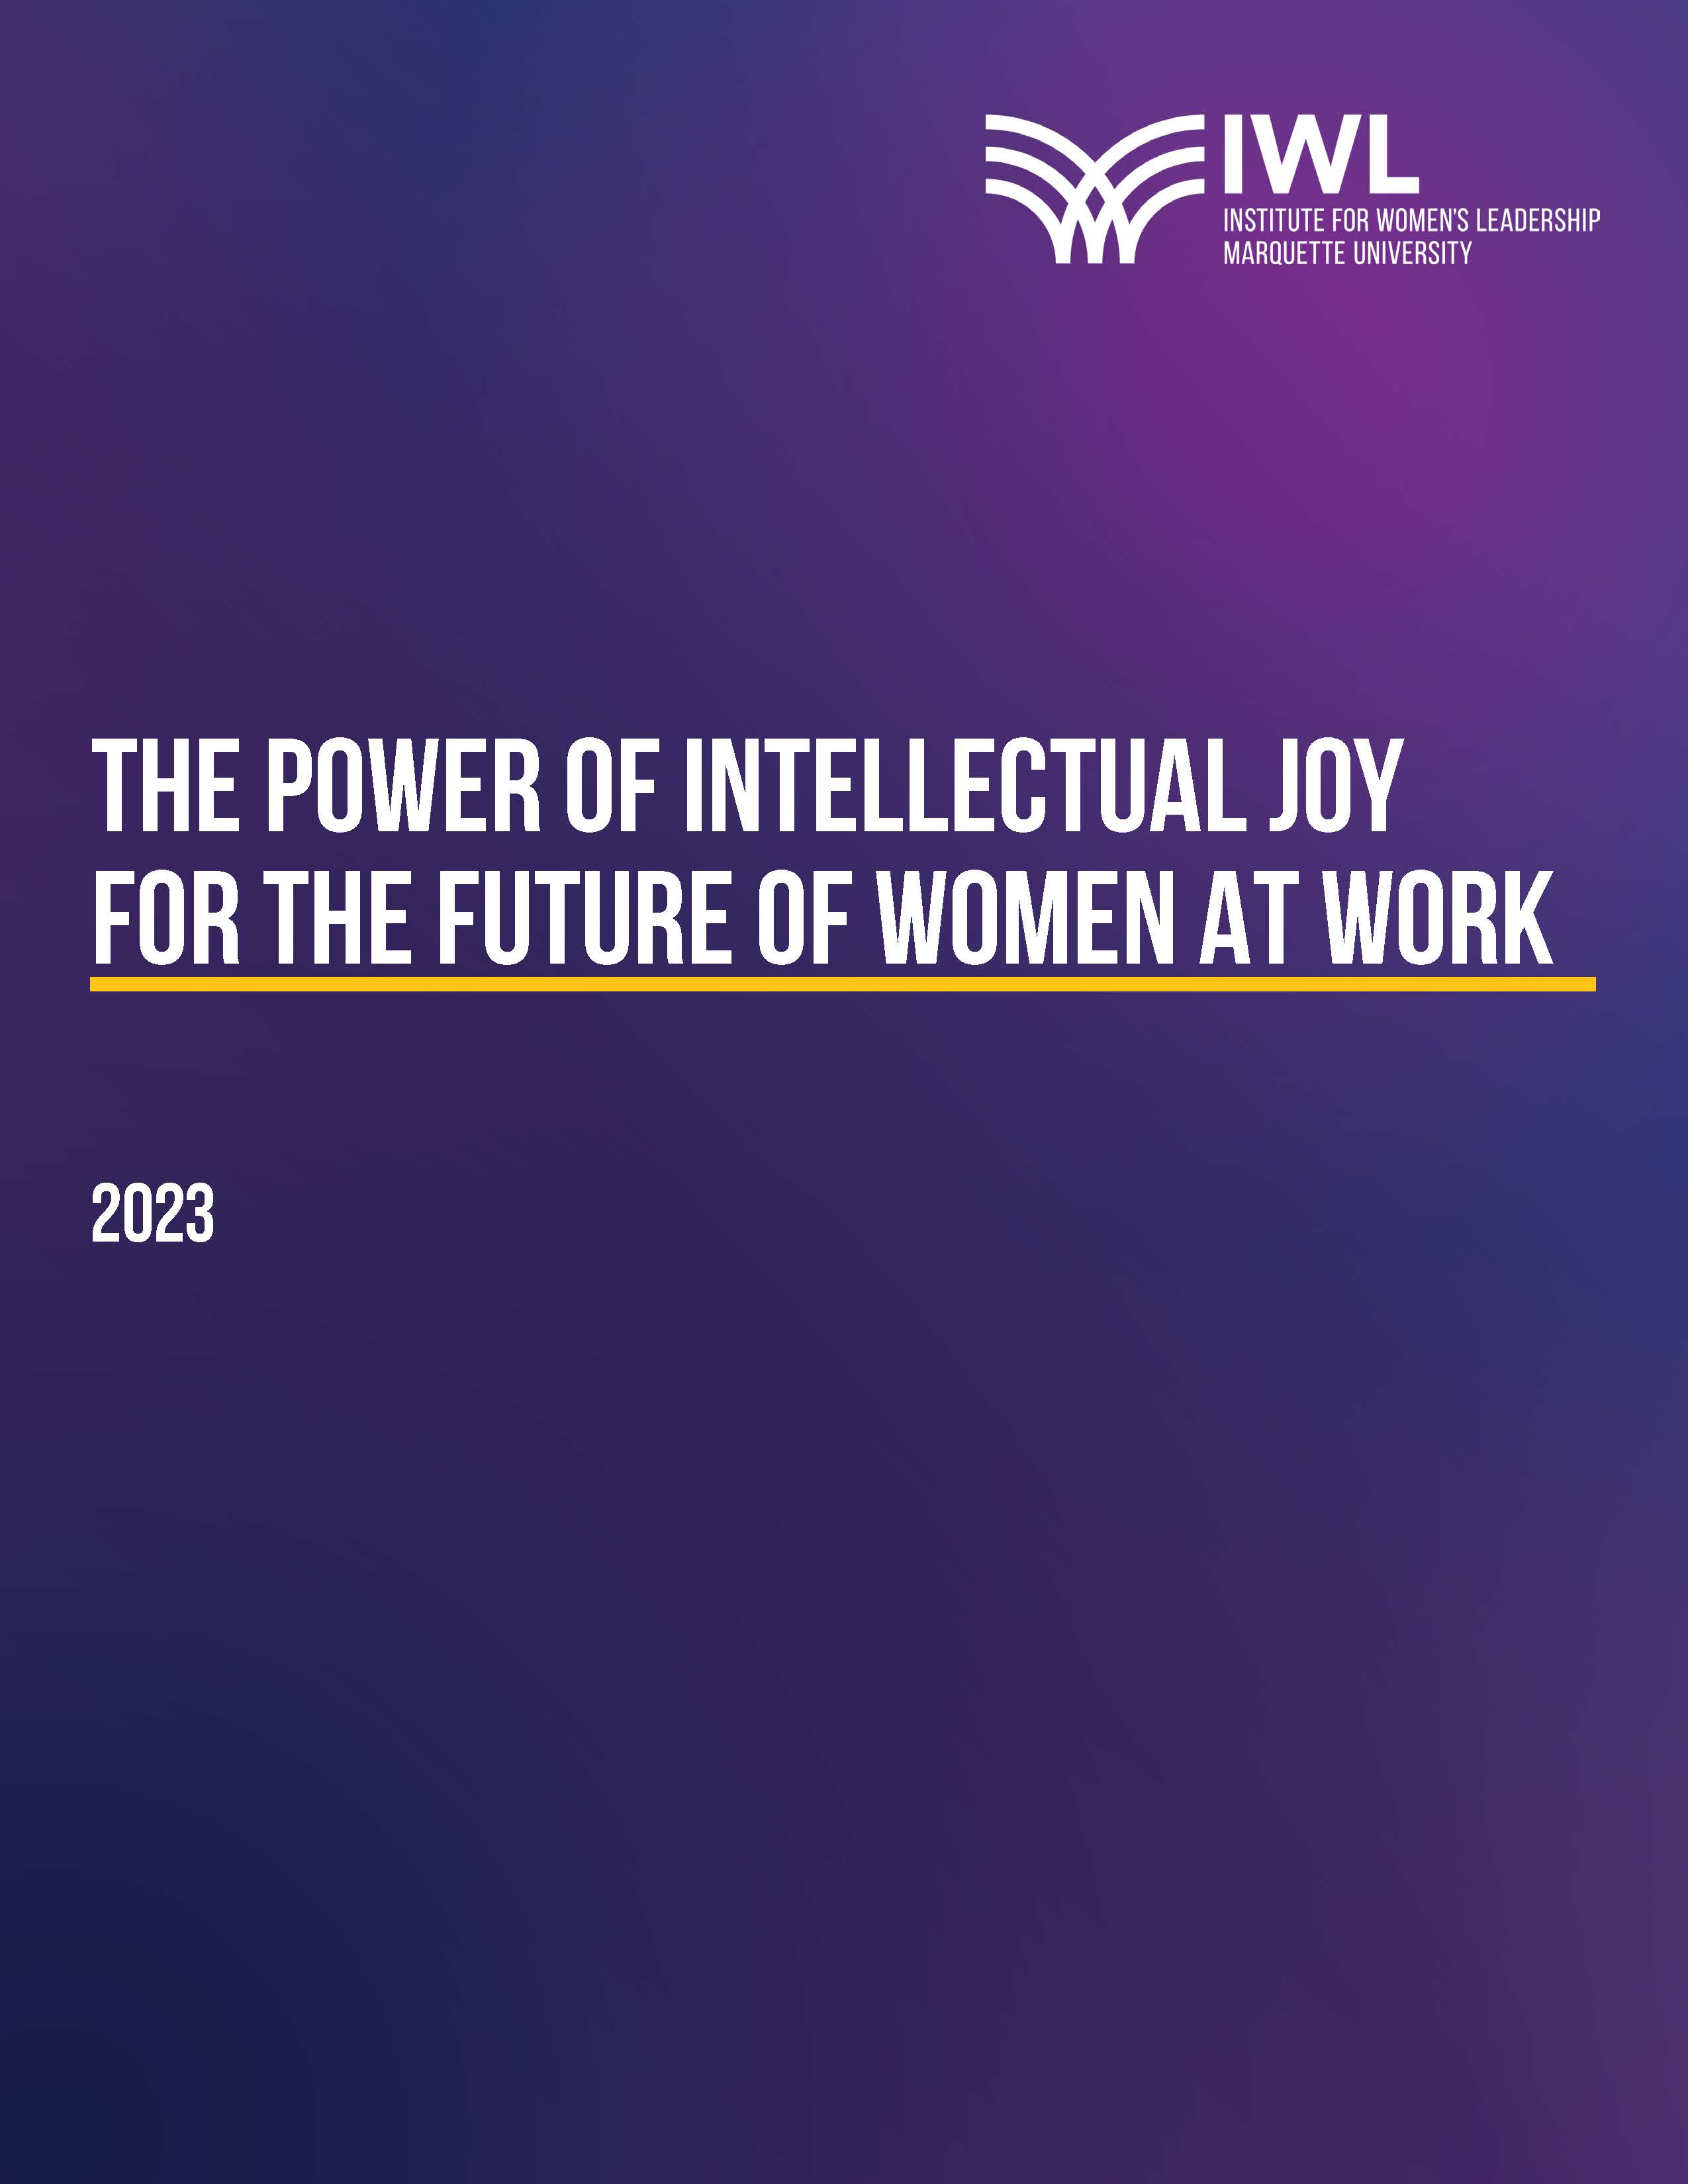 FRONT COVER of "The Power of Intellectual Joy for the Future of Women at Work"